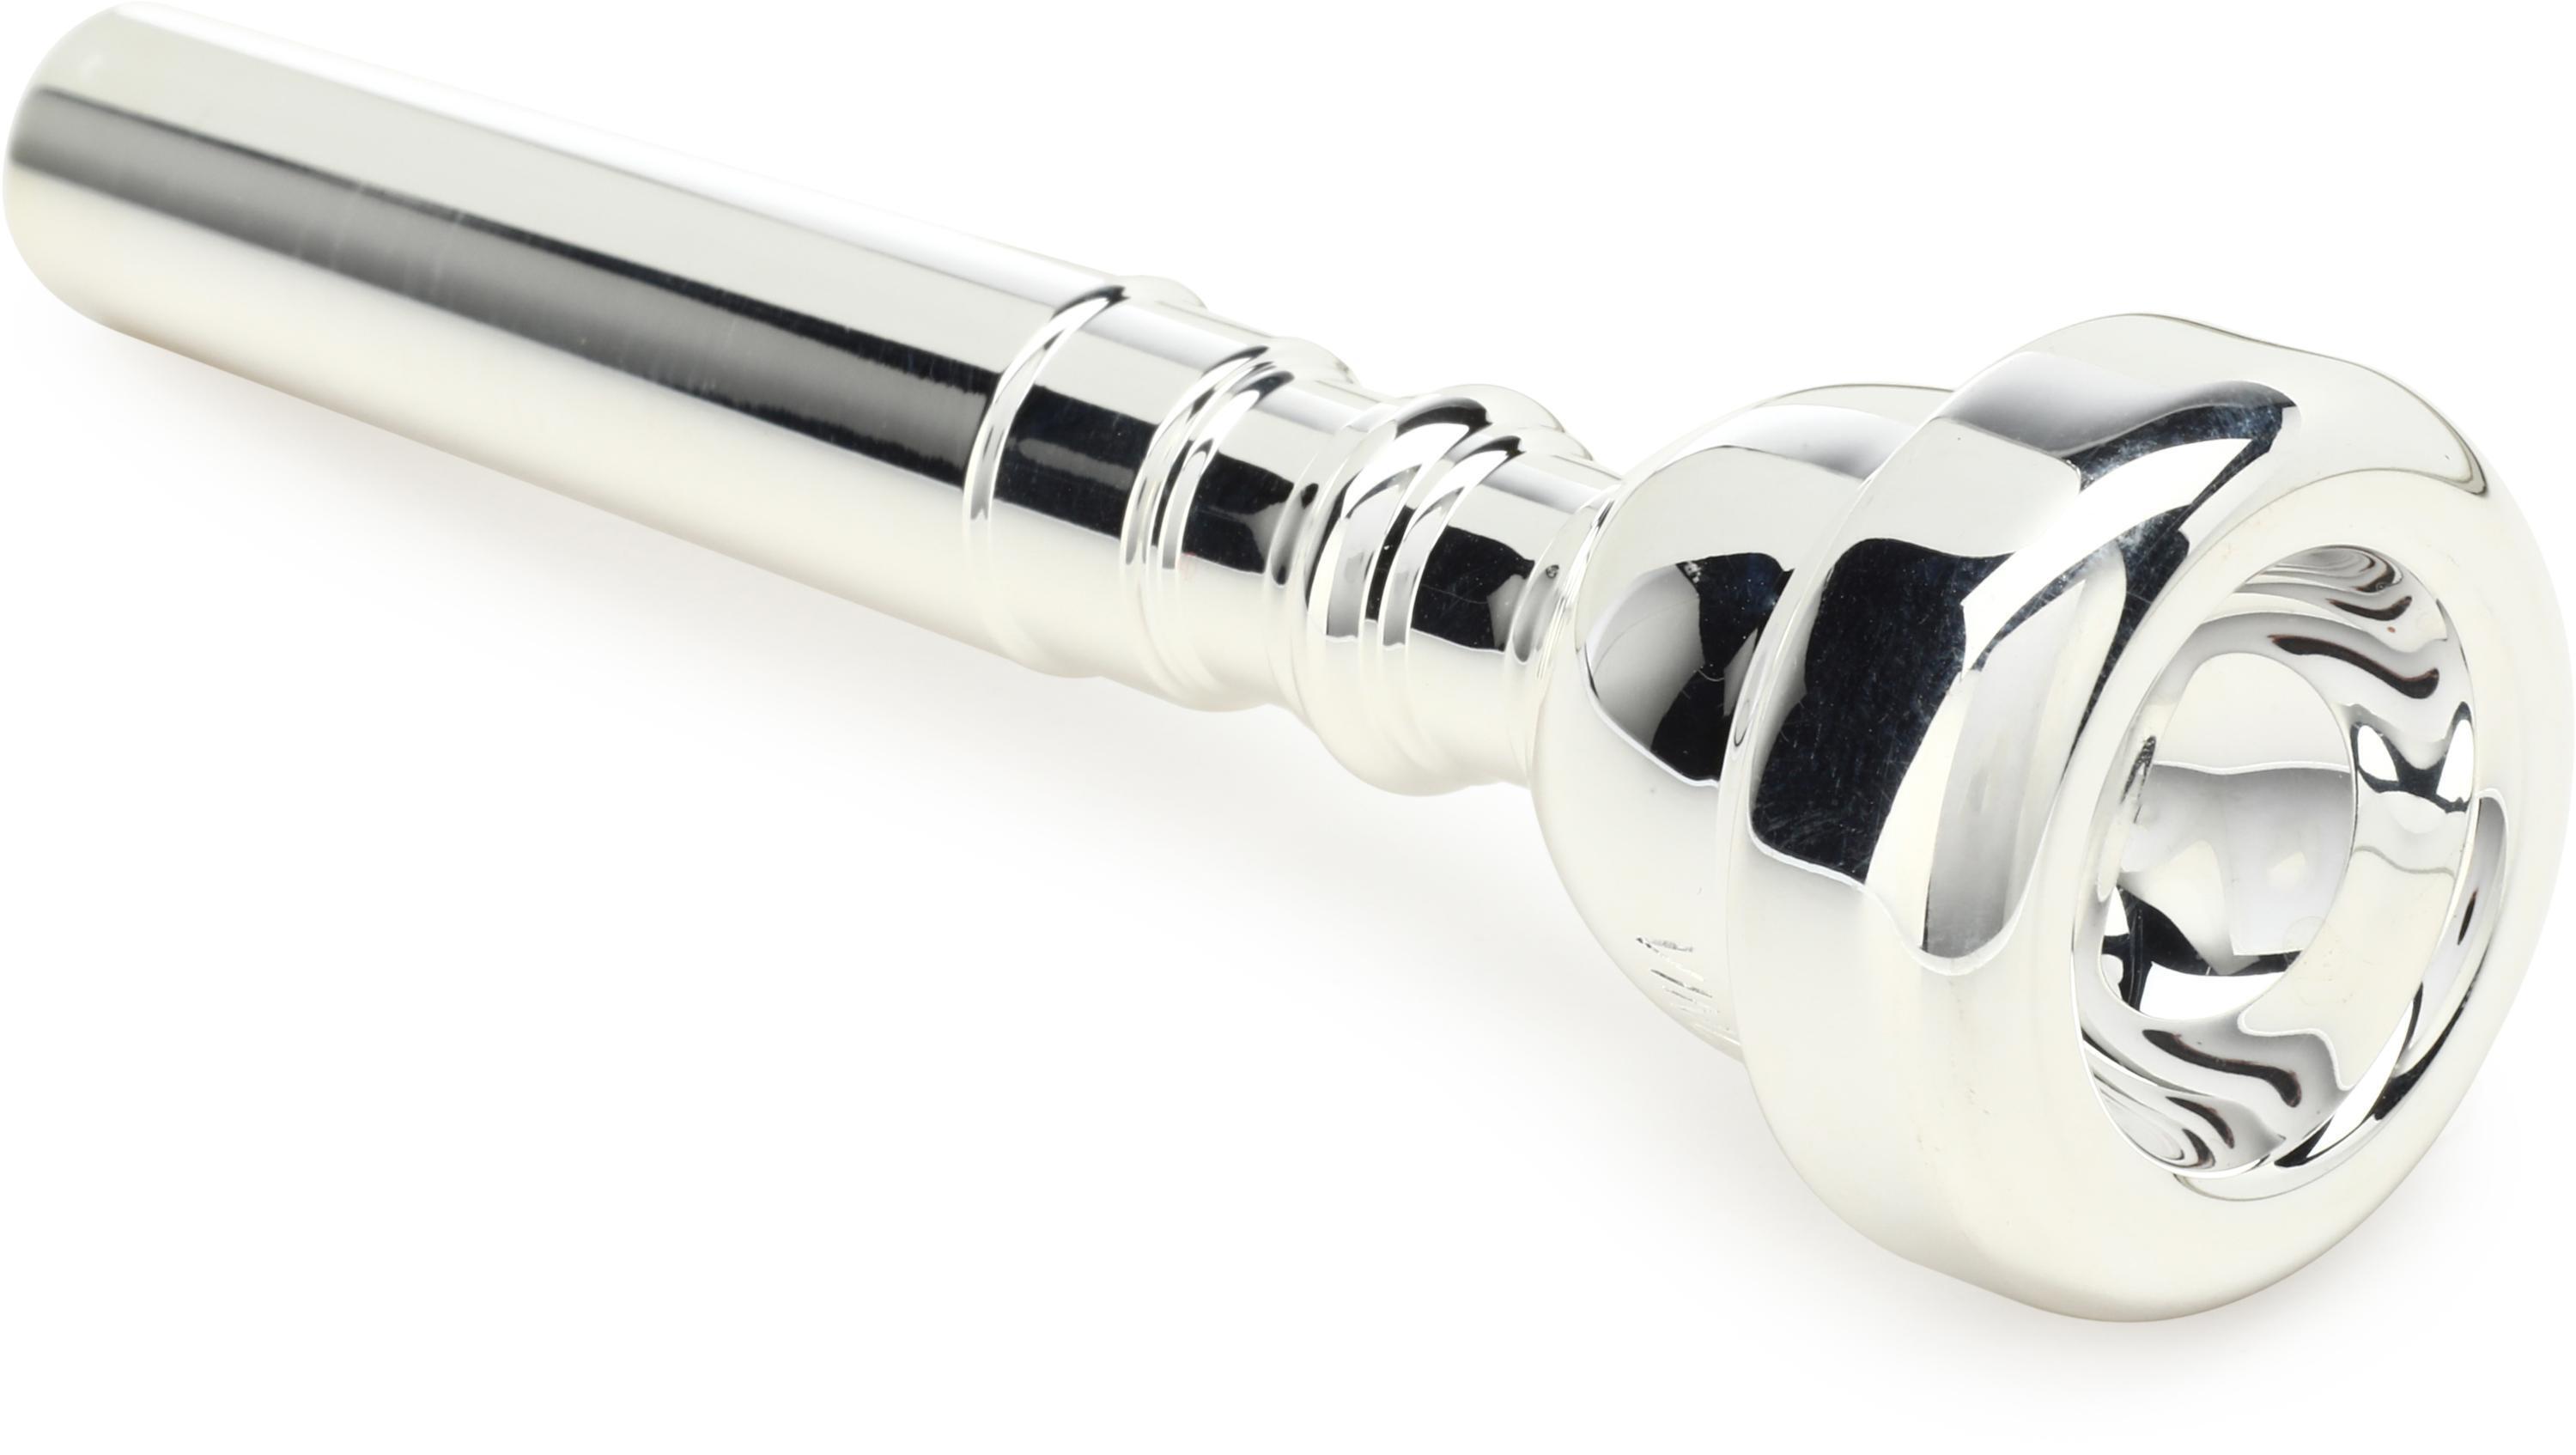 Bach 351 Classic Series Silver-plated Trumpet Mouthpiece - 7C